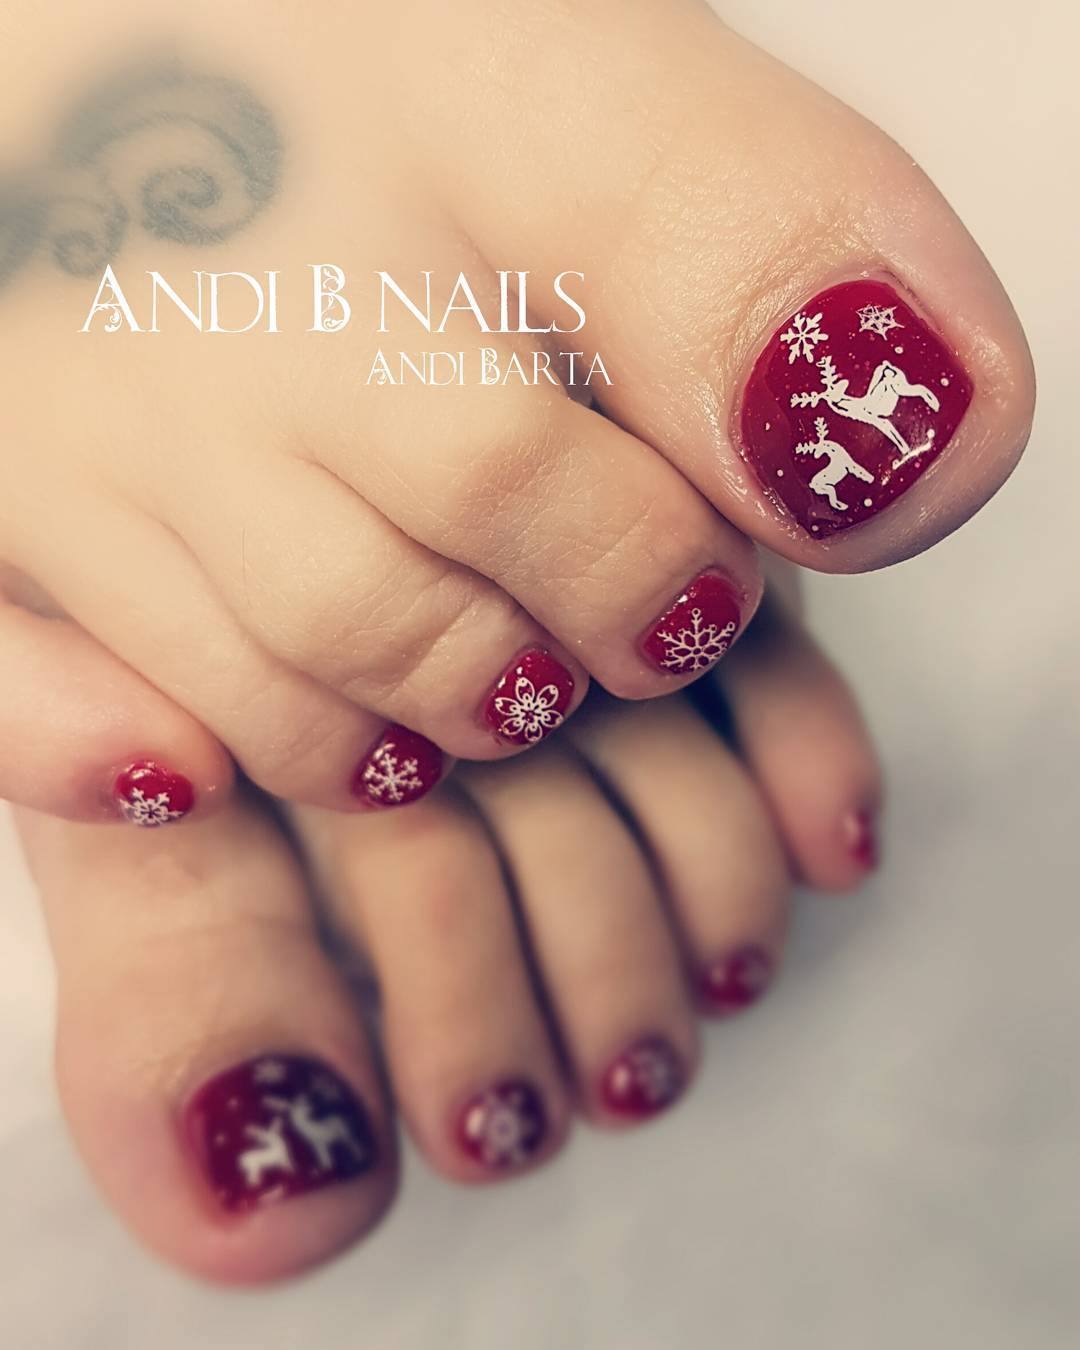 Marvelous red nails with reindeer and snowflakes. Pic by andibnailsandlashes